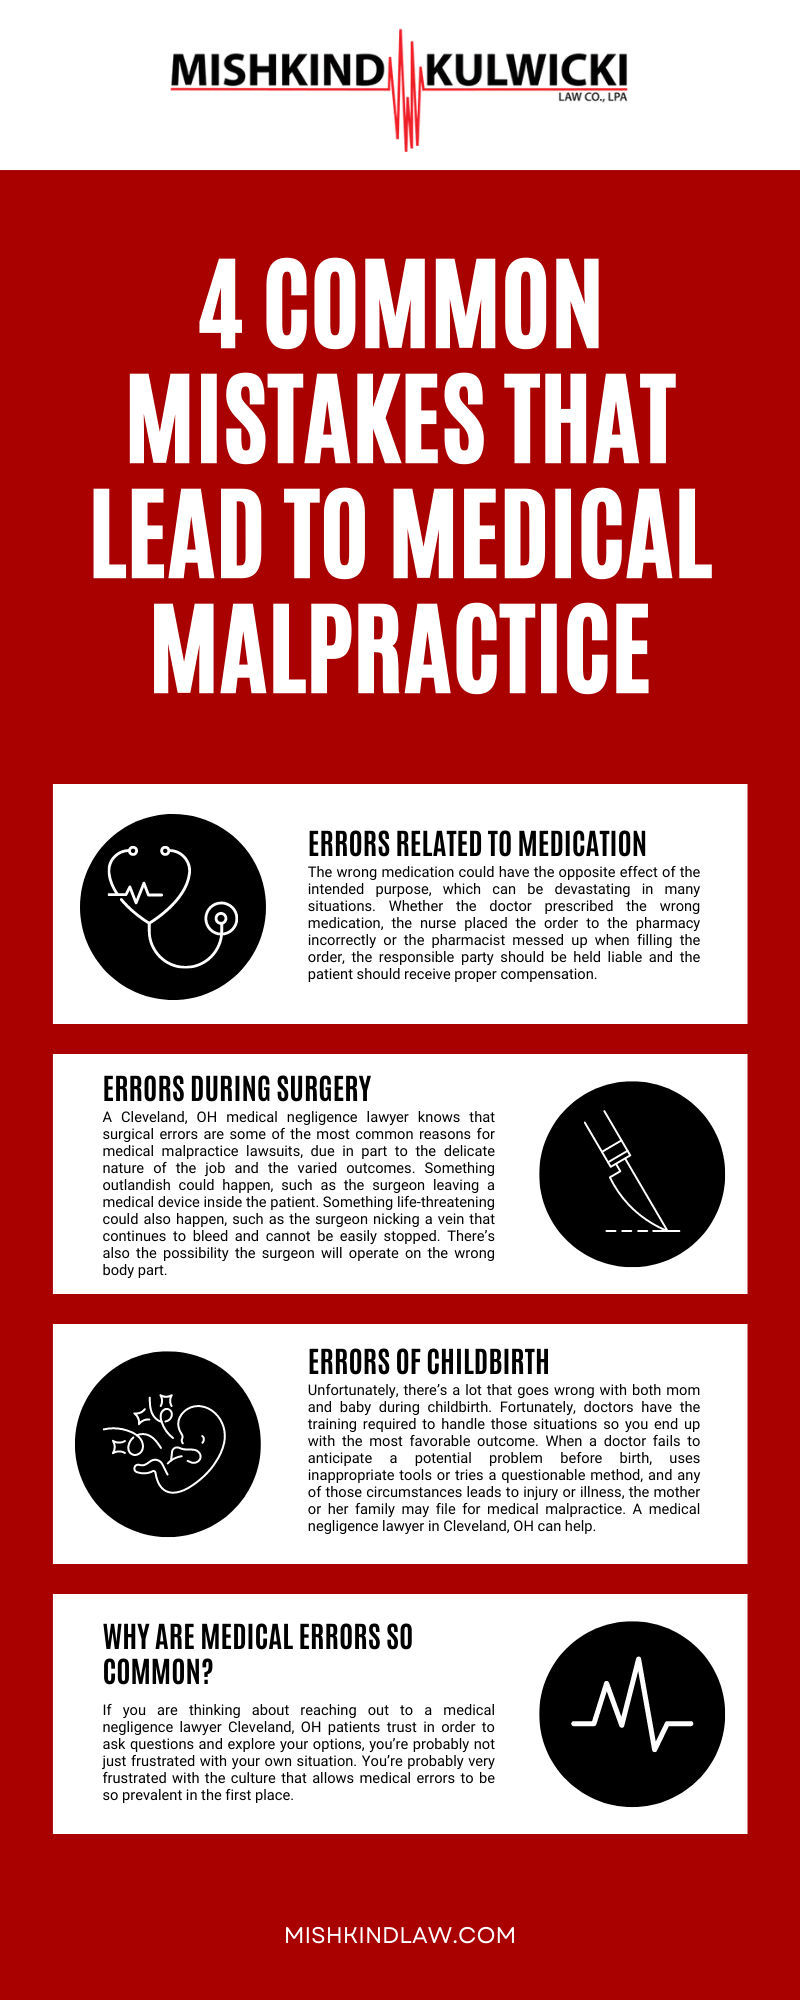 4 Common Mistakes That Lead to Medical Malpractice